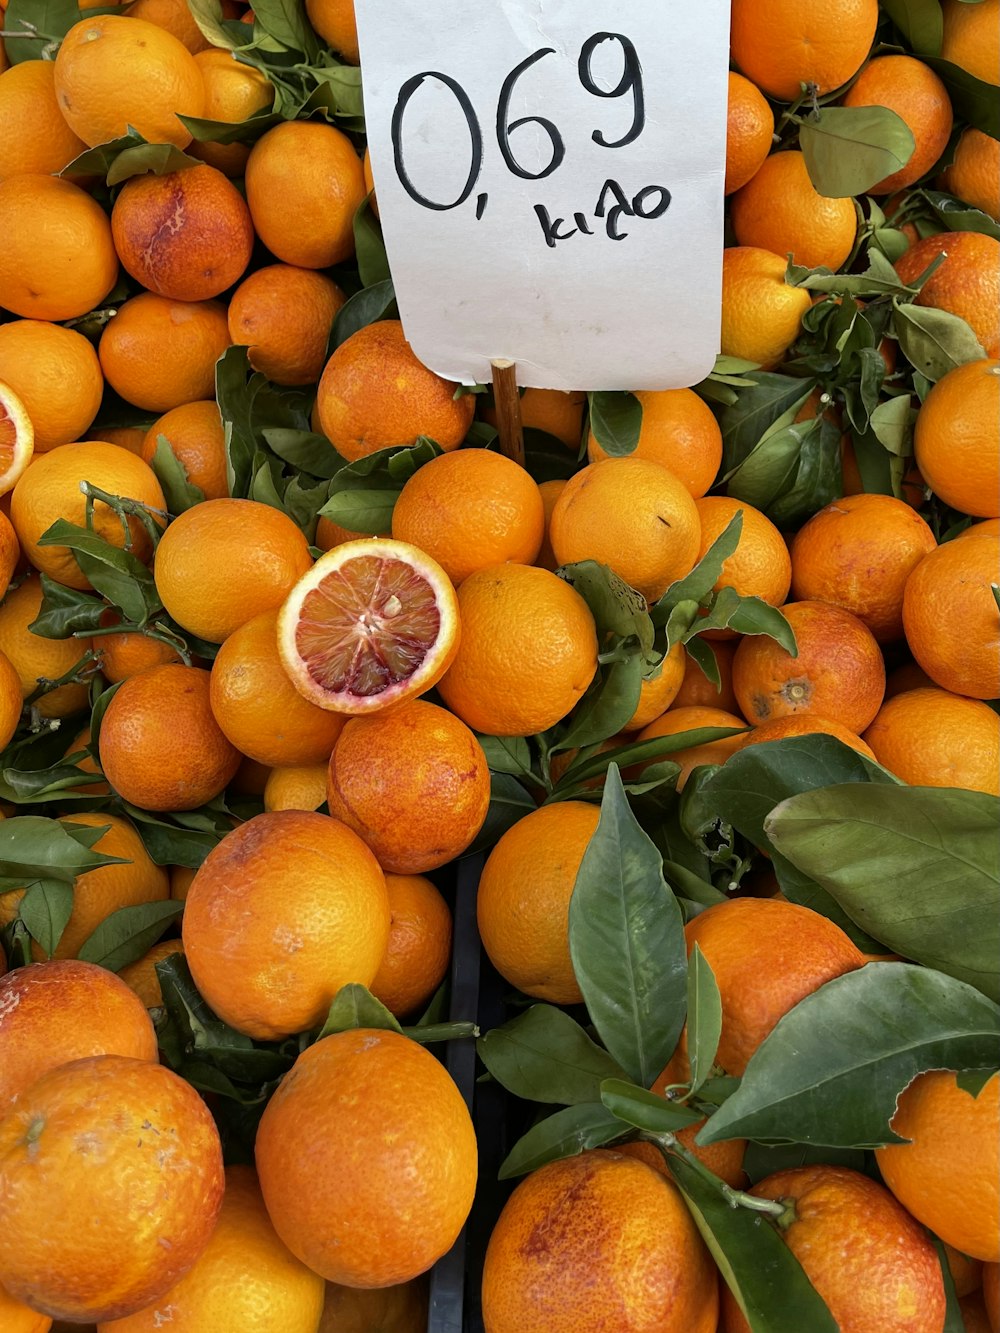 a pile of oranges with a price sign on them